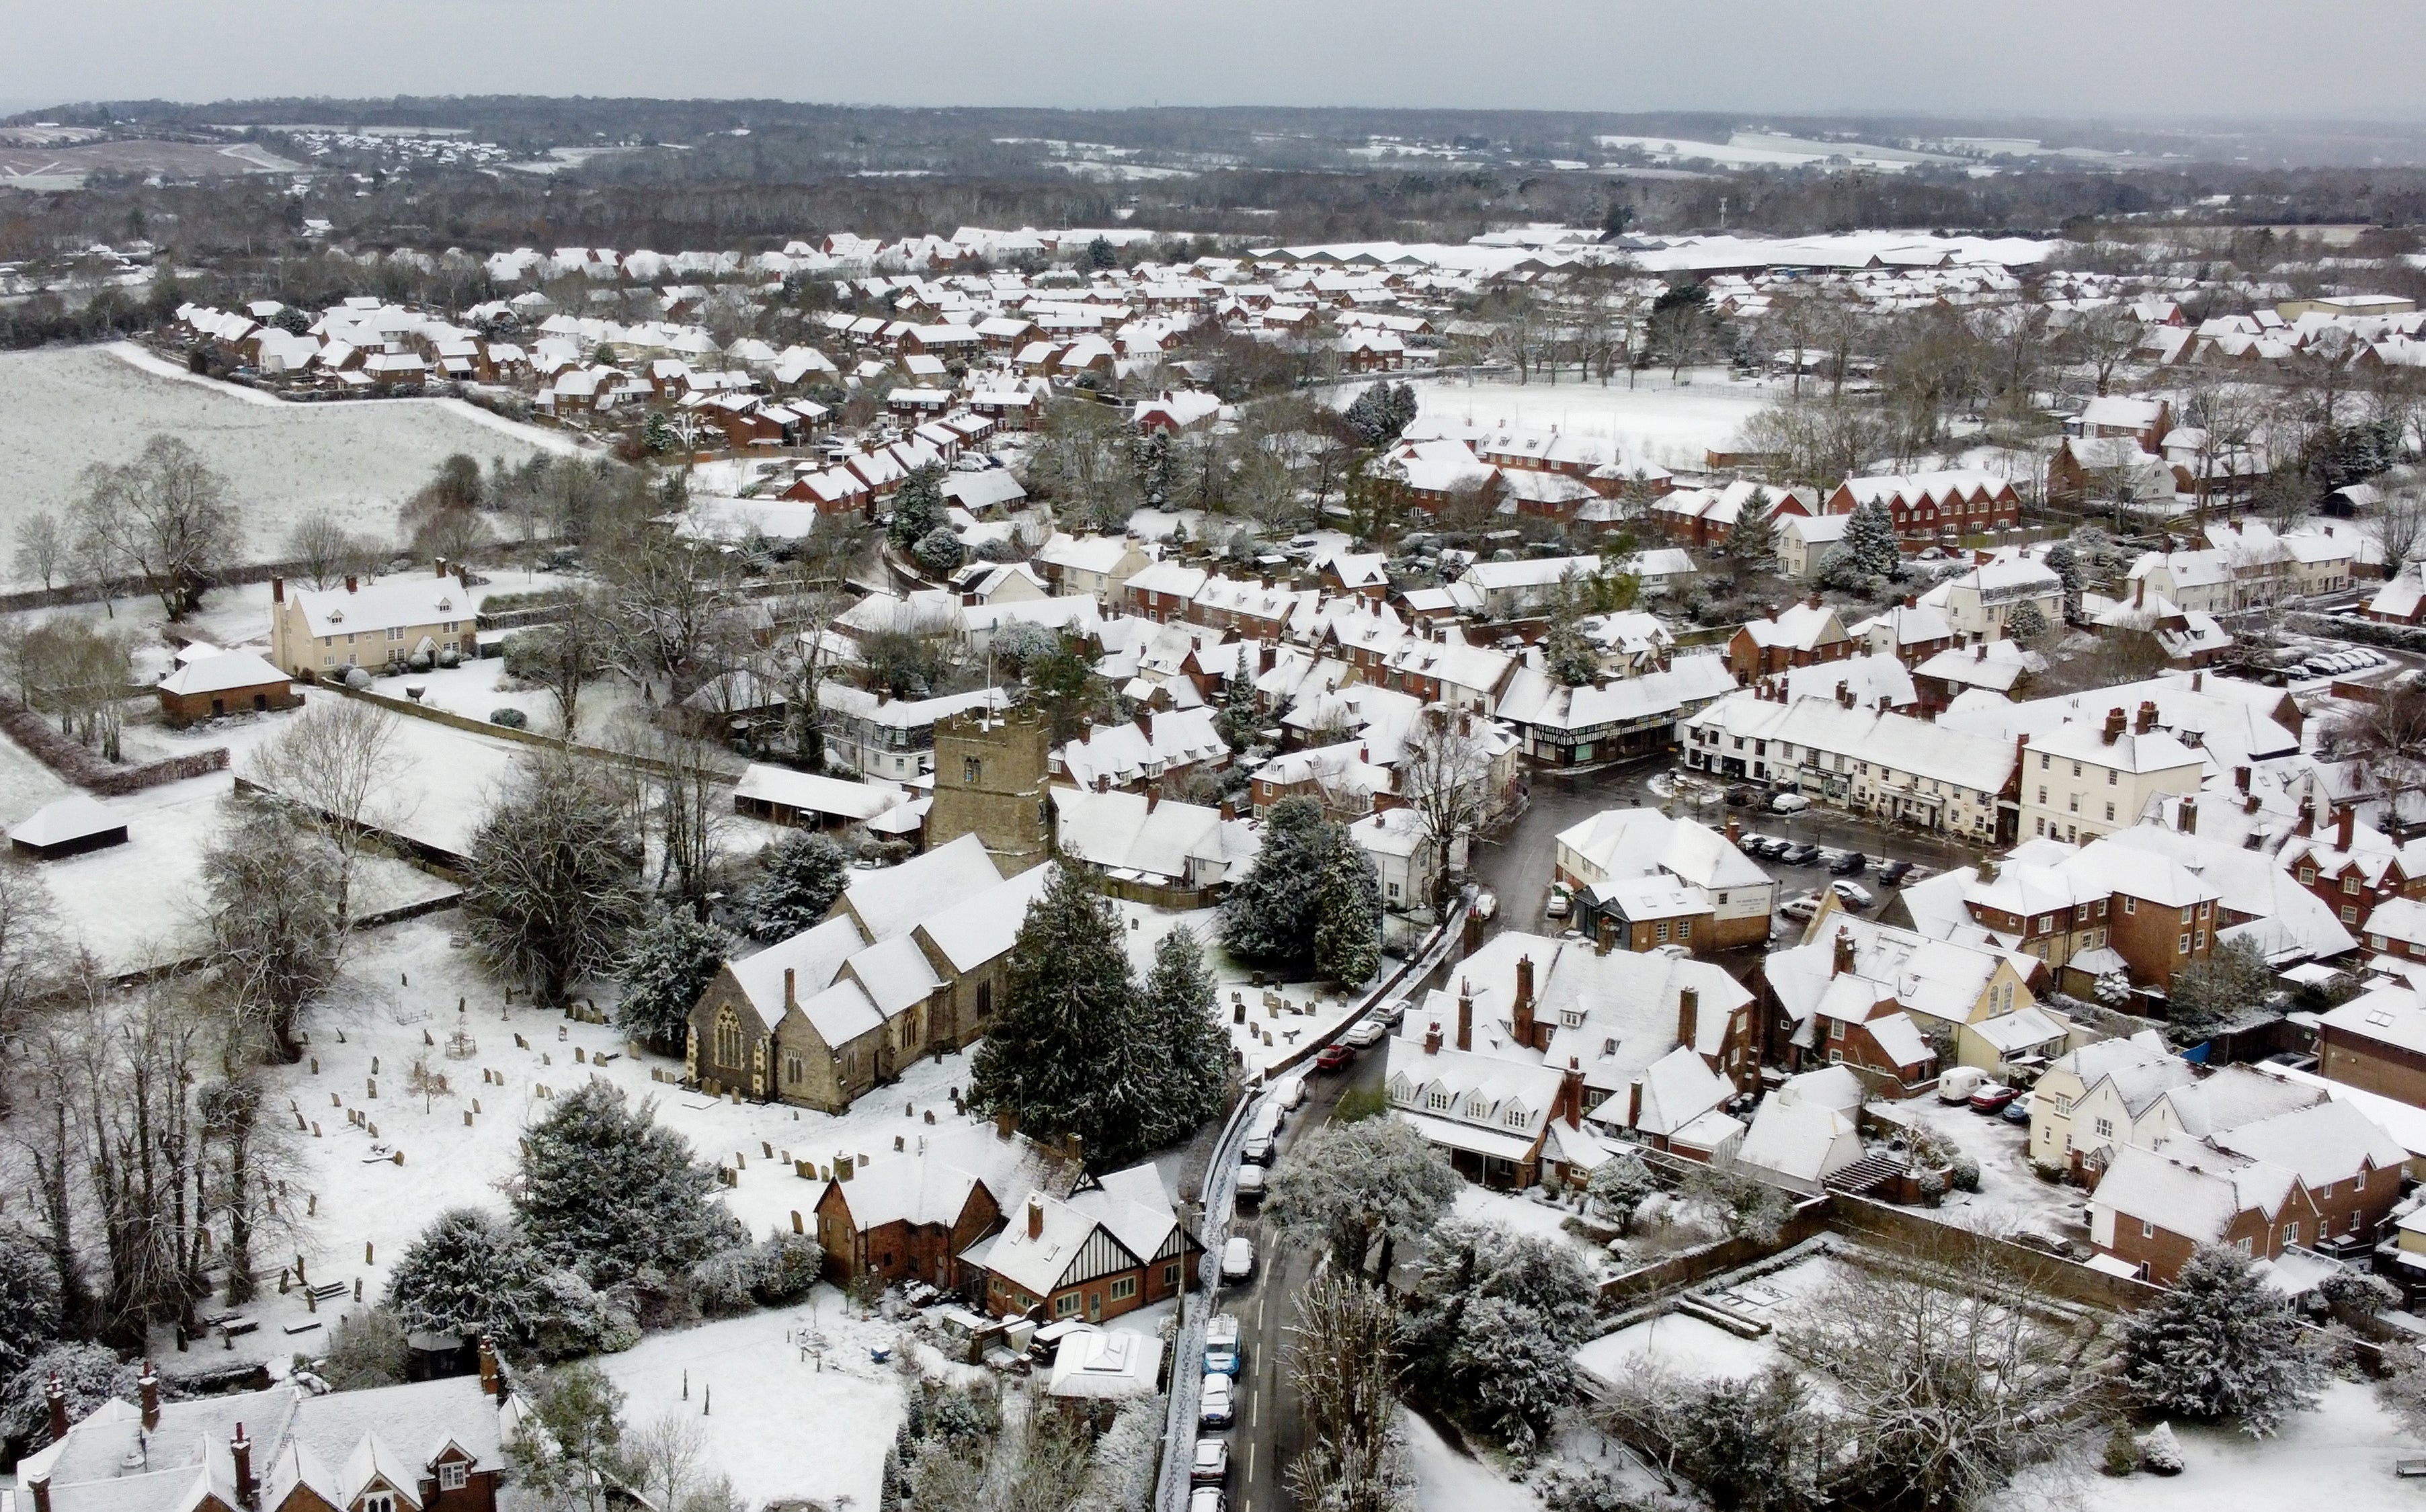 A view over the village of Lenham in Kent following snowfall.